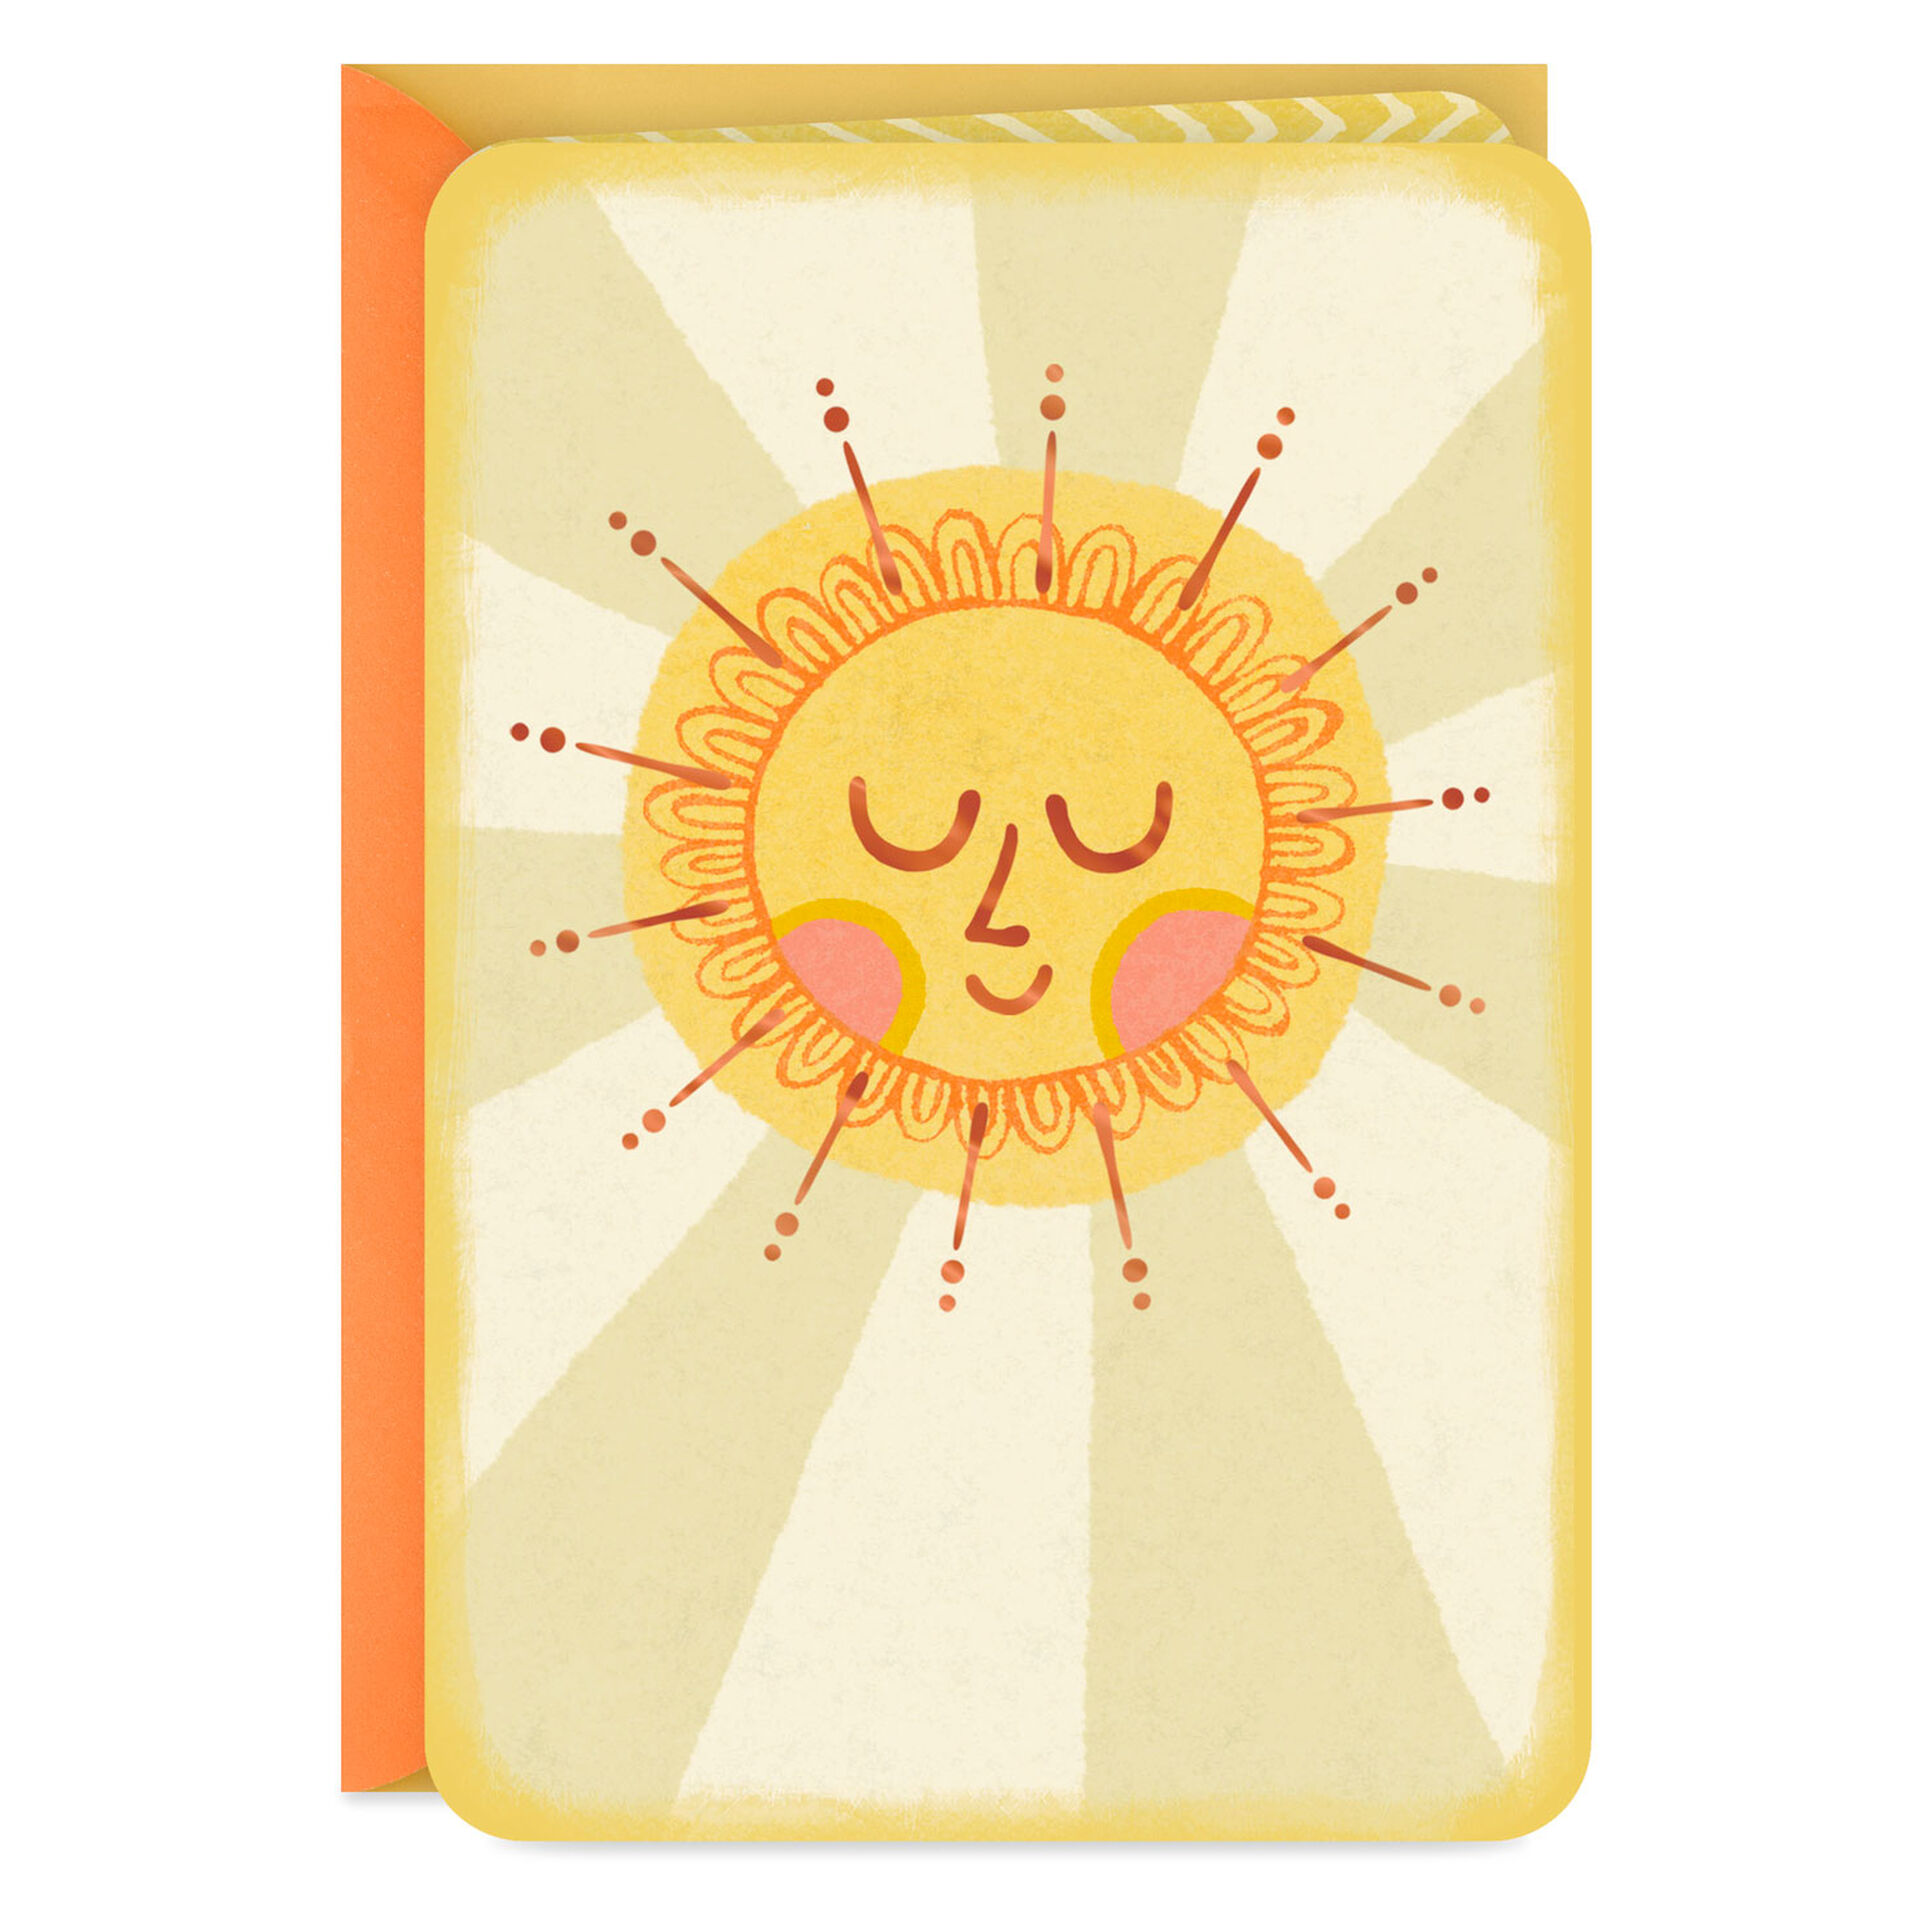 Sunny-Thoughts-Appreciation-Card_299FCR1186_01